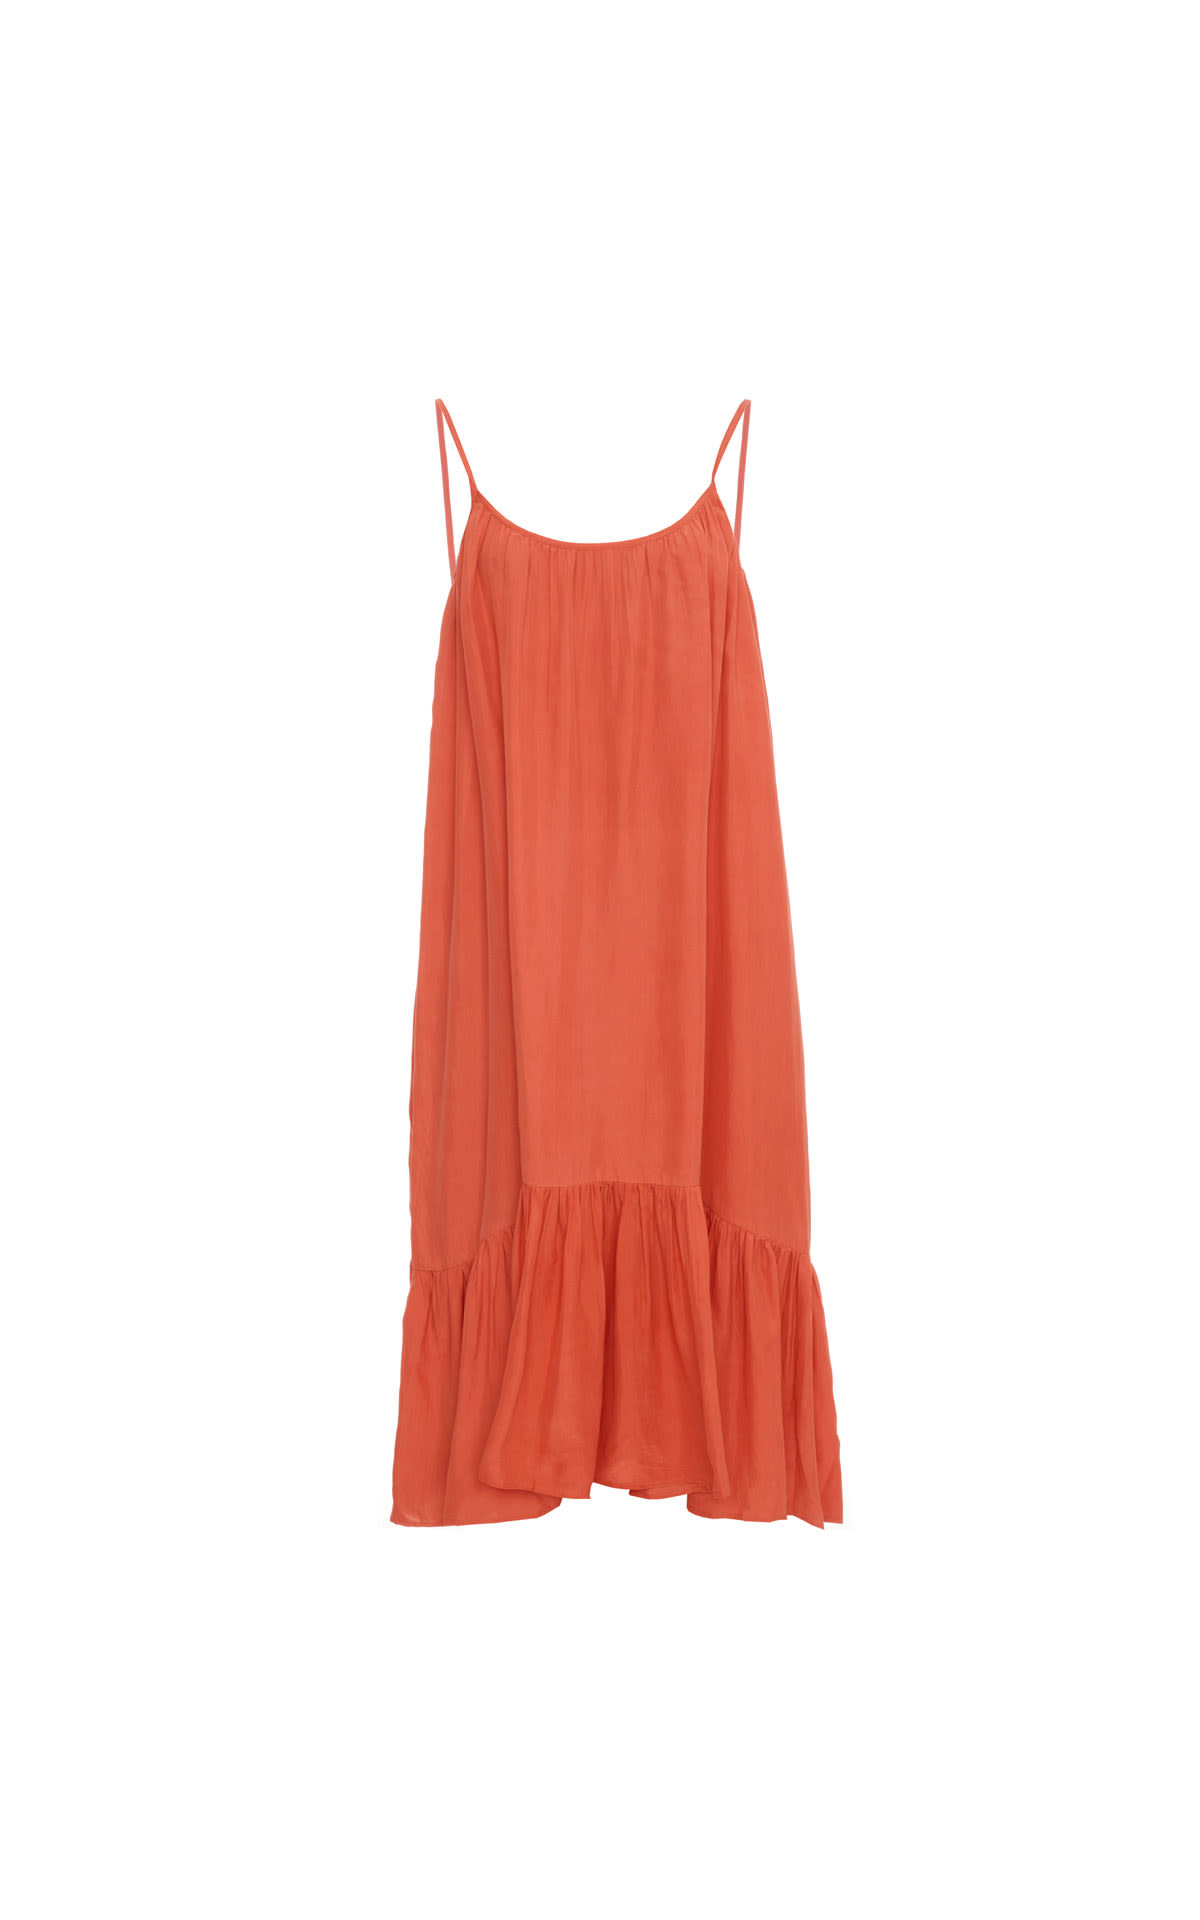 AllSaints Paola silk dress from Bicester Village